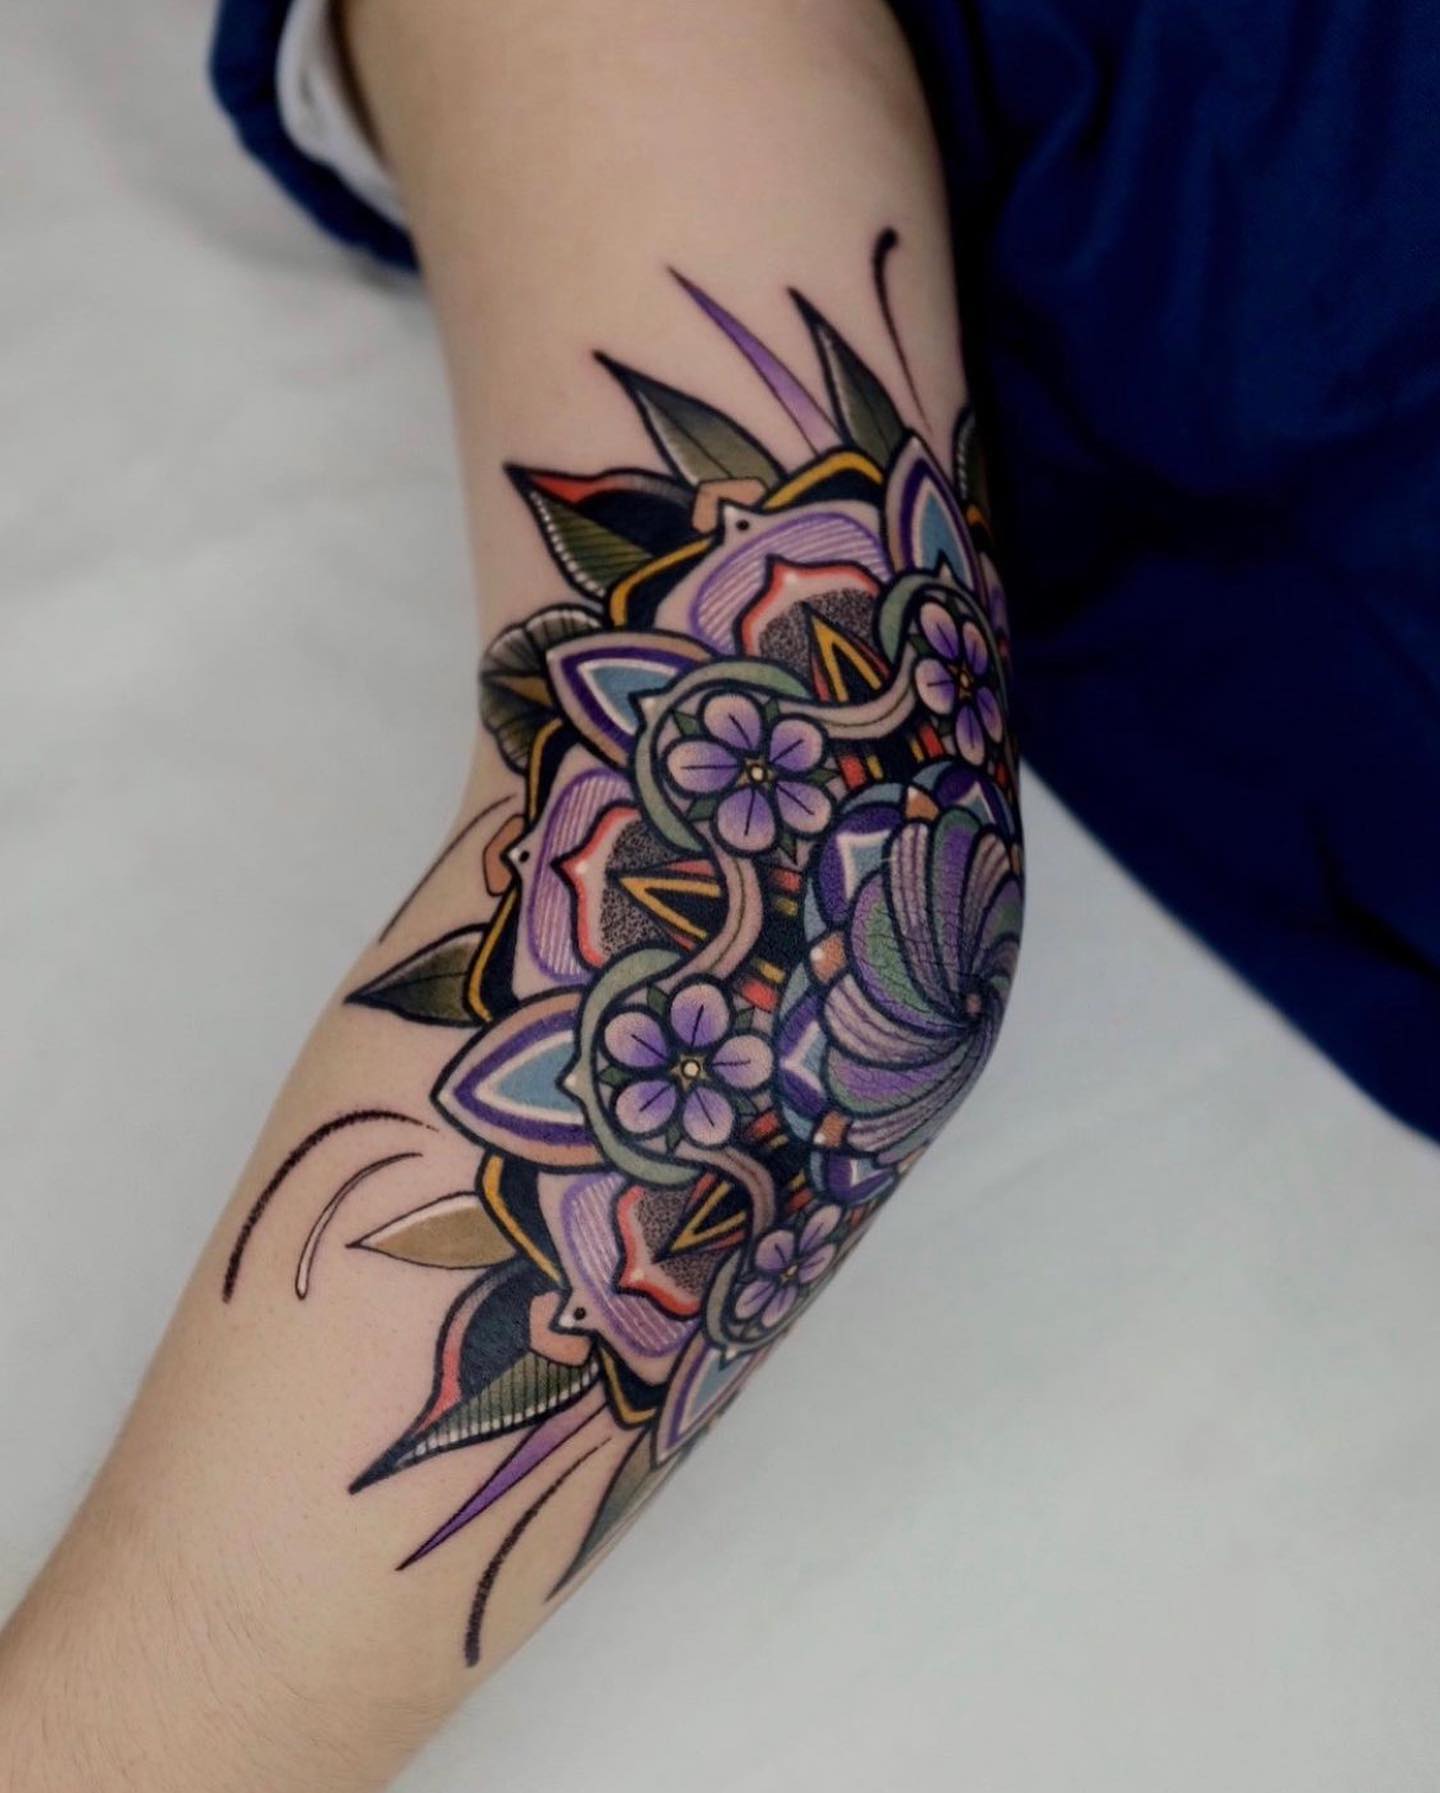 Some guys really and truly love flowers. Are you one of them? If so, this elbow tattoo will describe your character. Add a pop of purple and show that you’re someone who likes the art and that you know how to appreciate gorgeous ideas, as well as larger concepts.